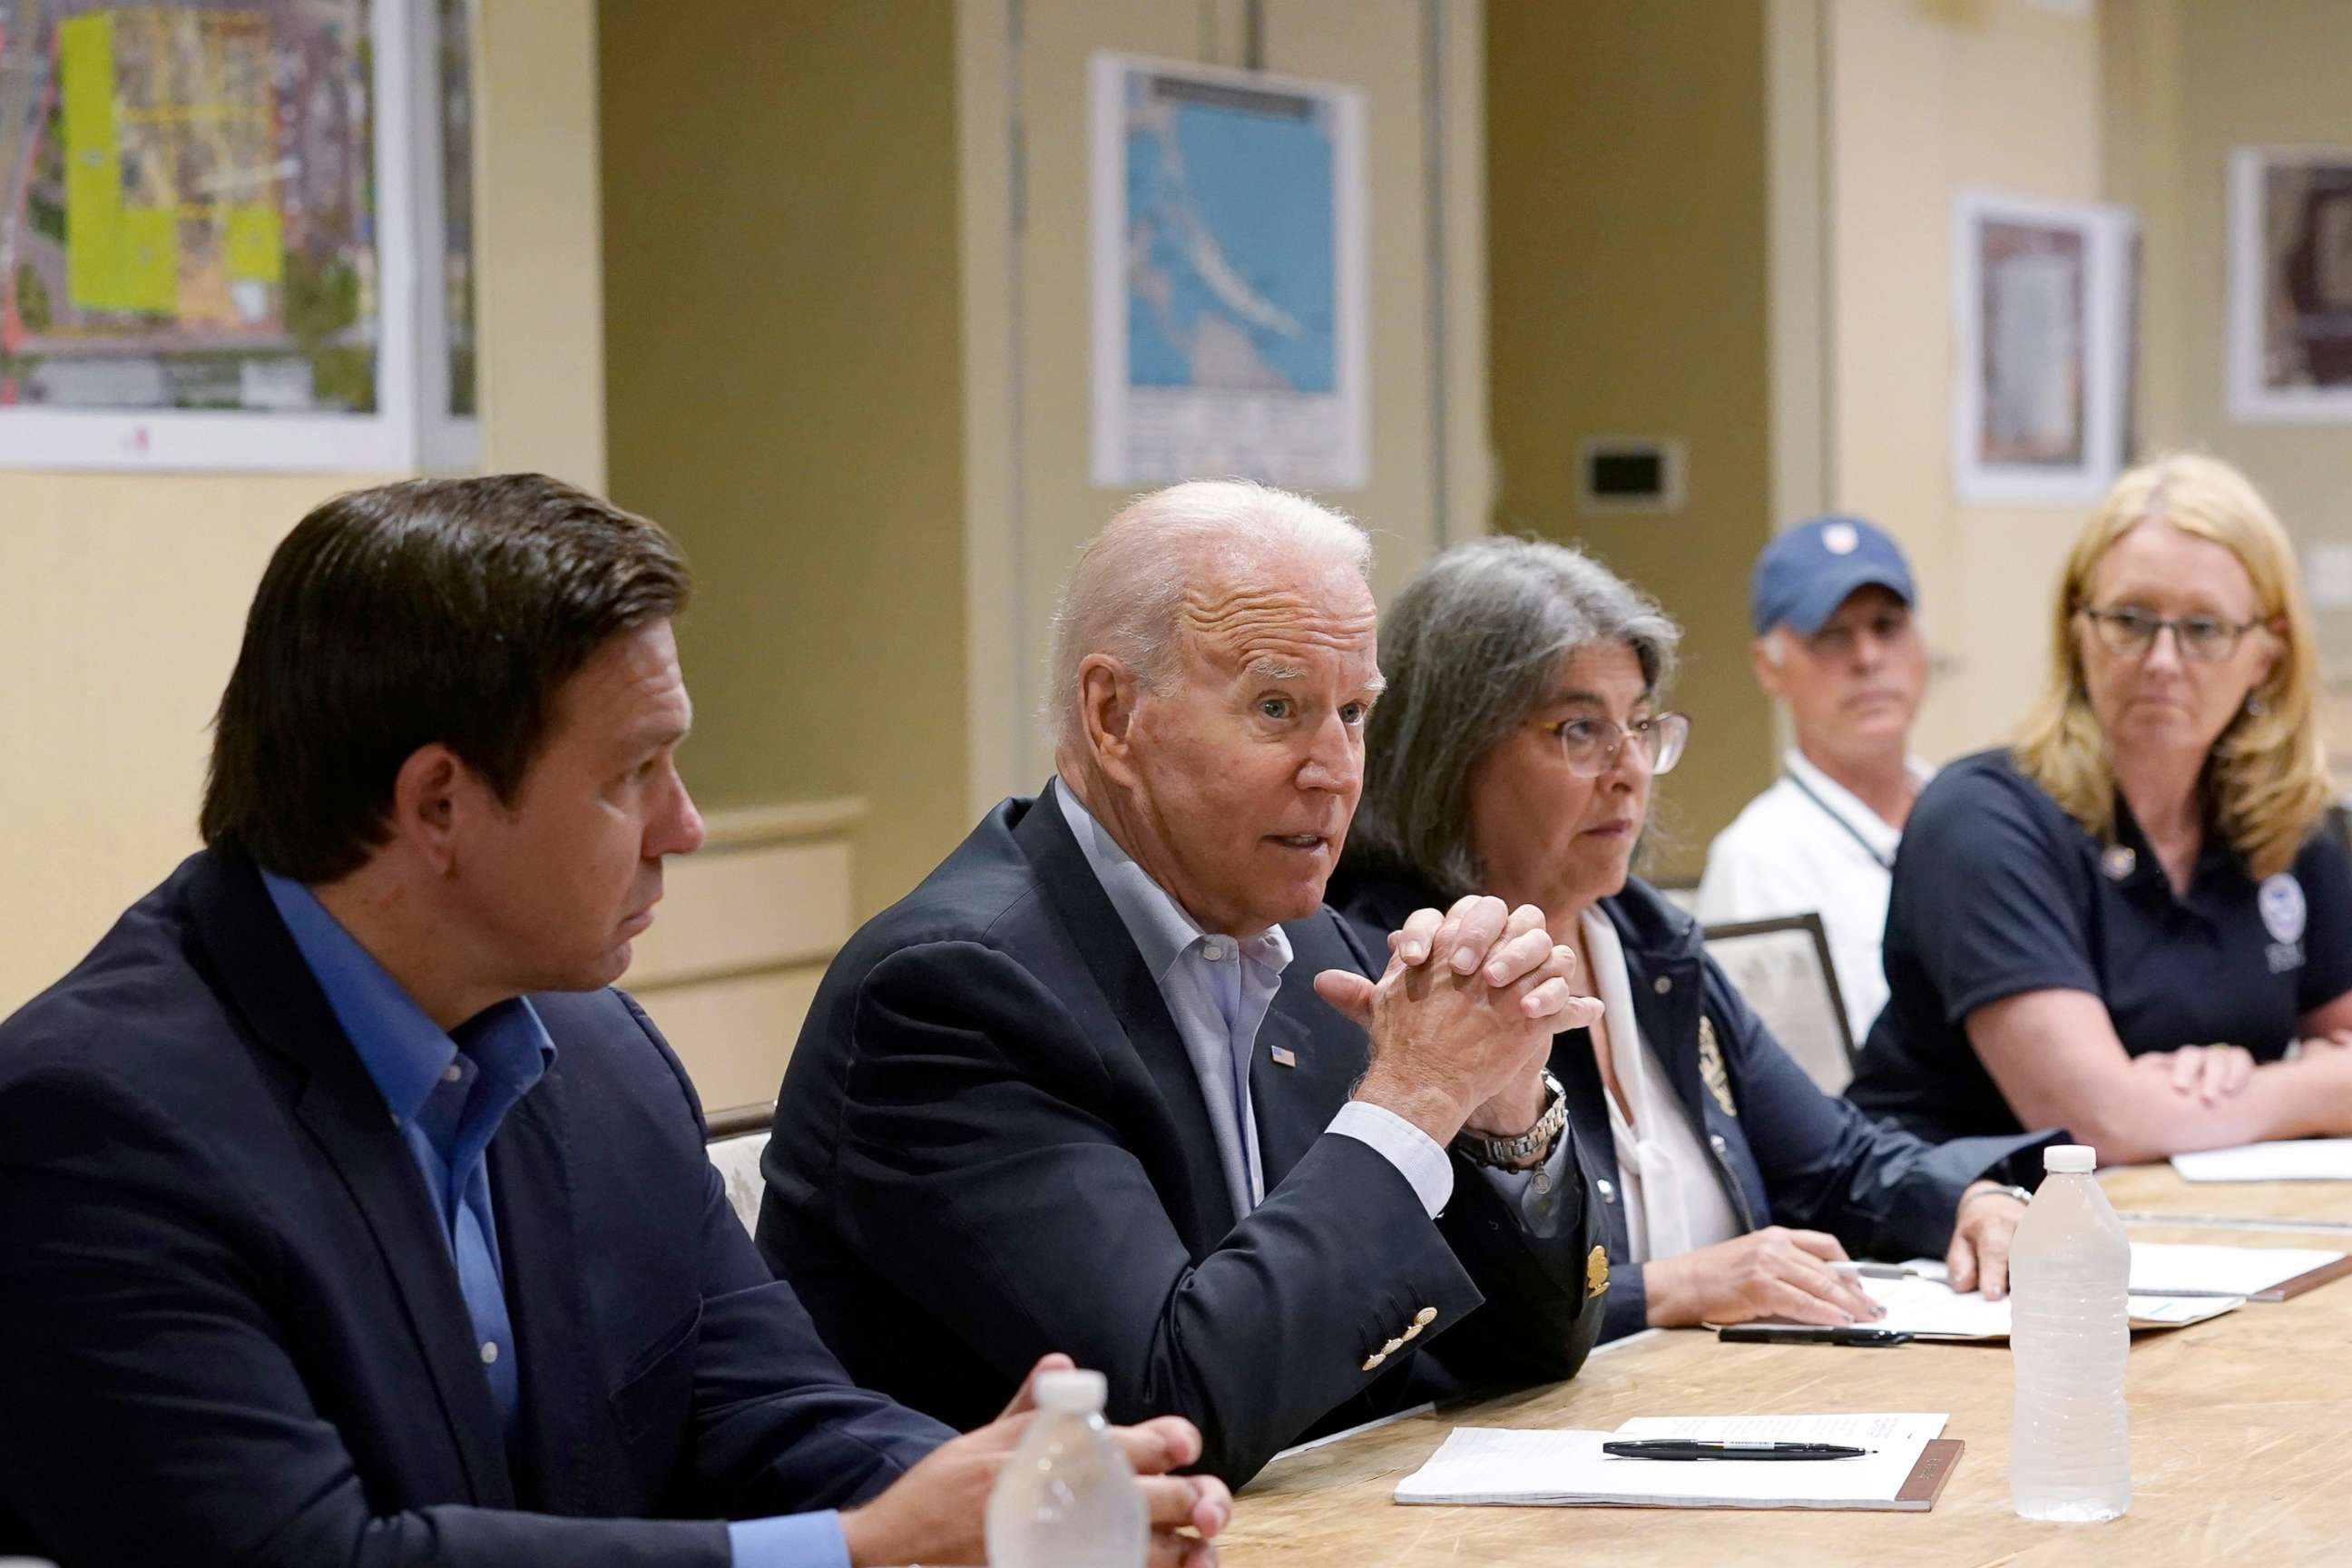 PHOTO: President Joe Biden, flanked by Florida Gov. Ron DeSantis and Incident Commander Mayor Daniella Levine Cava, speaks during a briefing in Miami Beach, Fla., July 1, 2021, on the condo tower that collapsed in Surfside, Fla., last week.